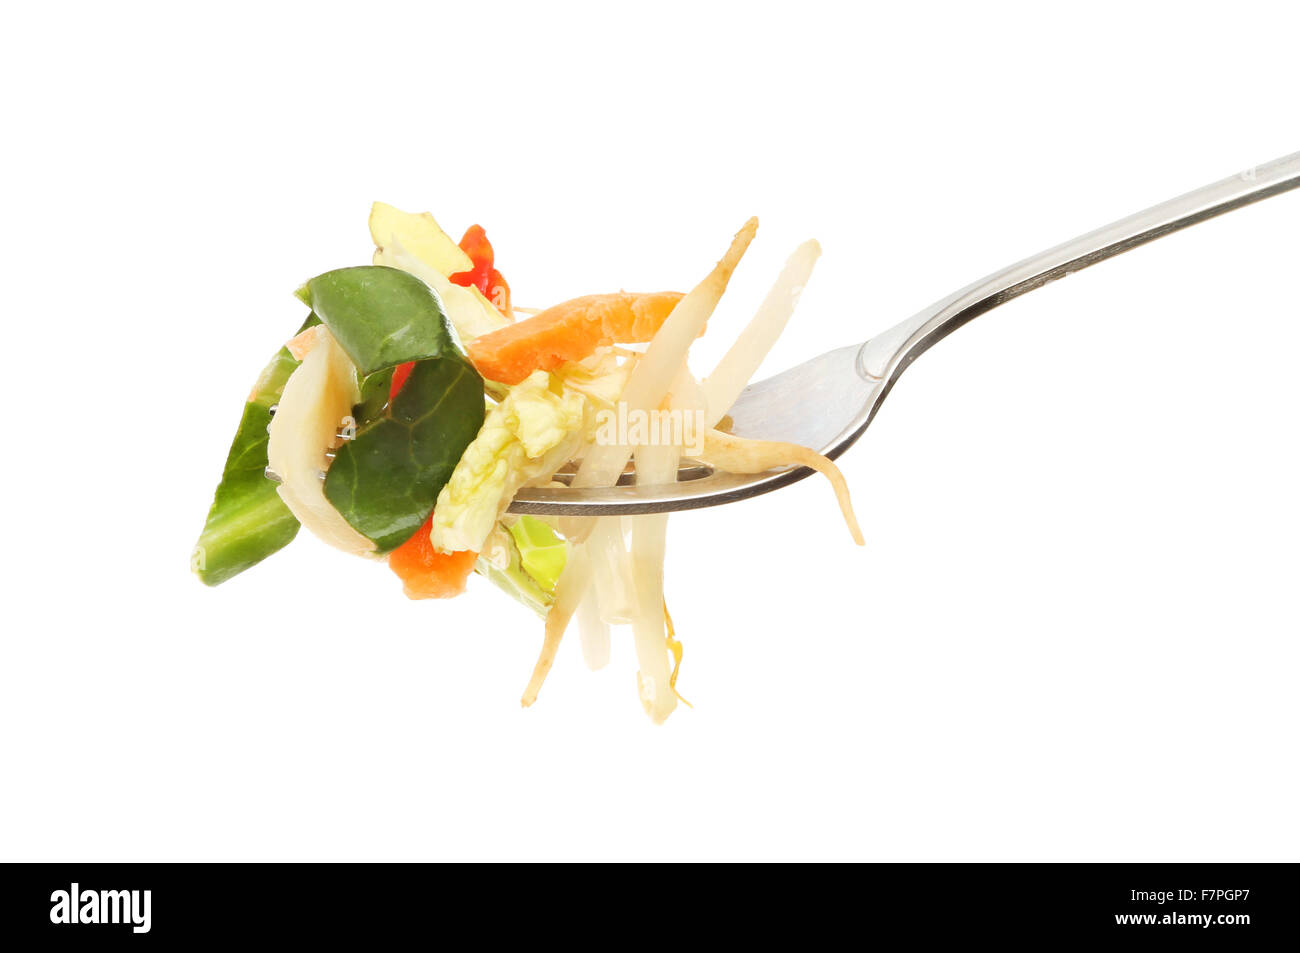 Stir fry vegetables on a fork isolated against white Stock Photo